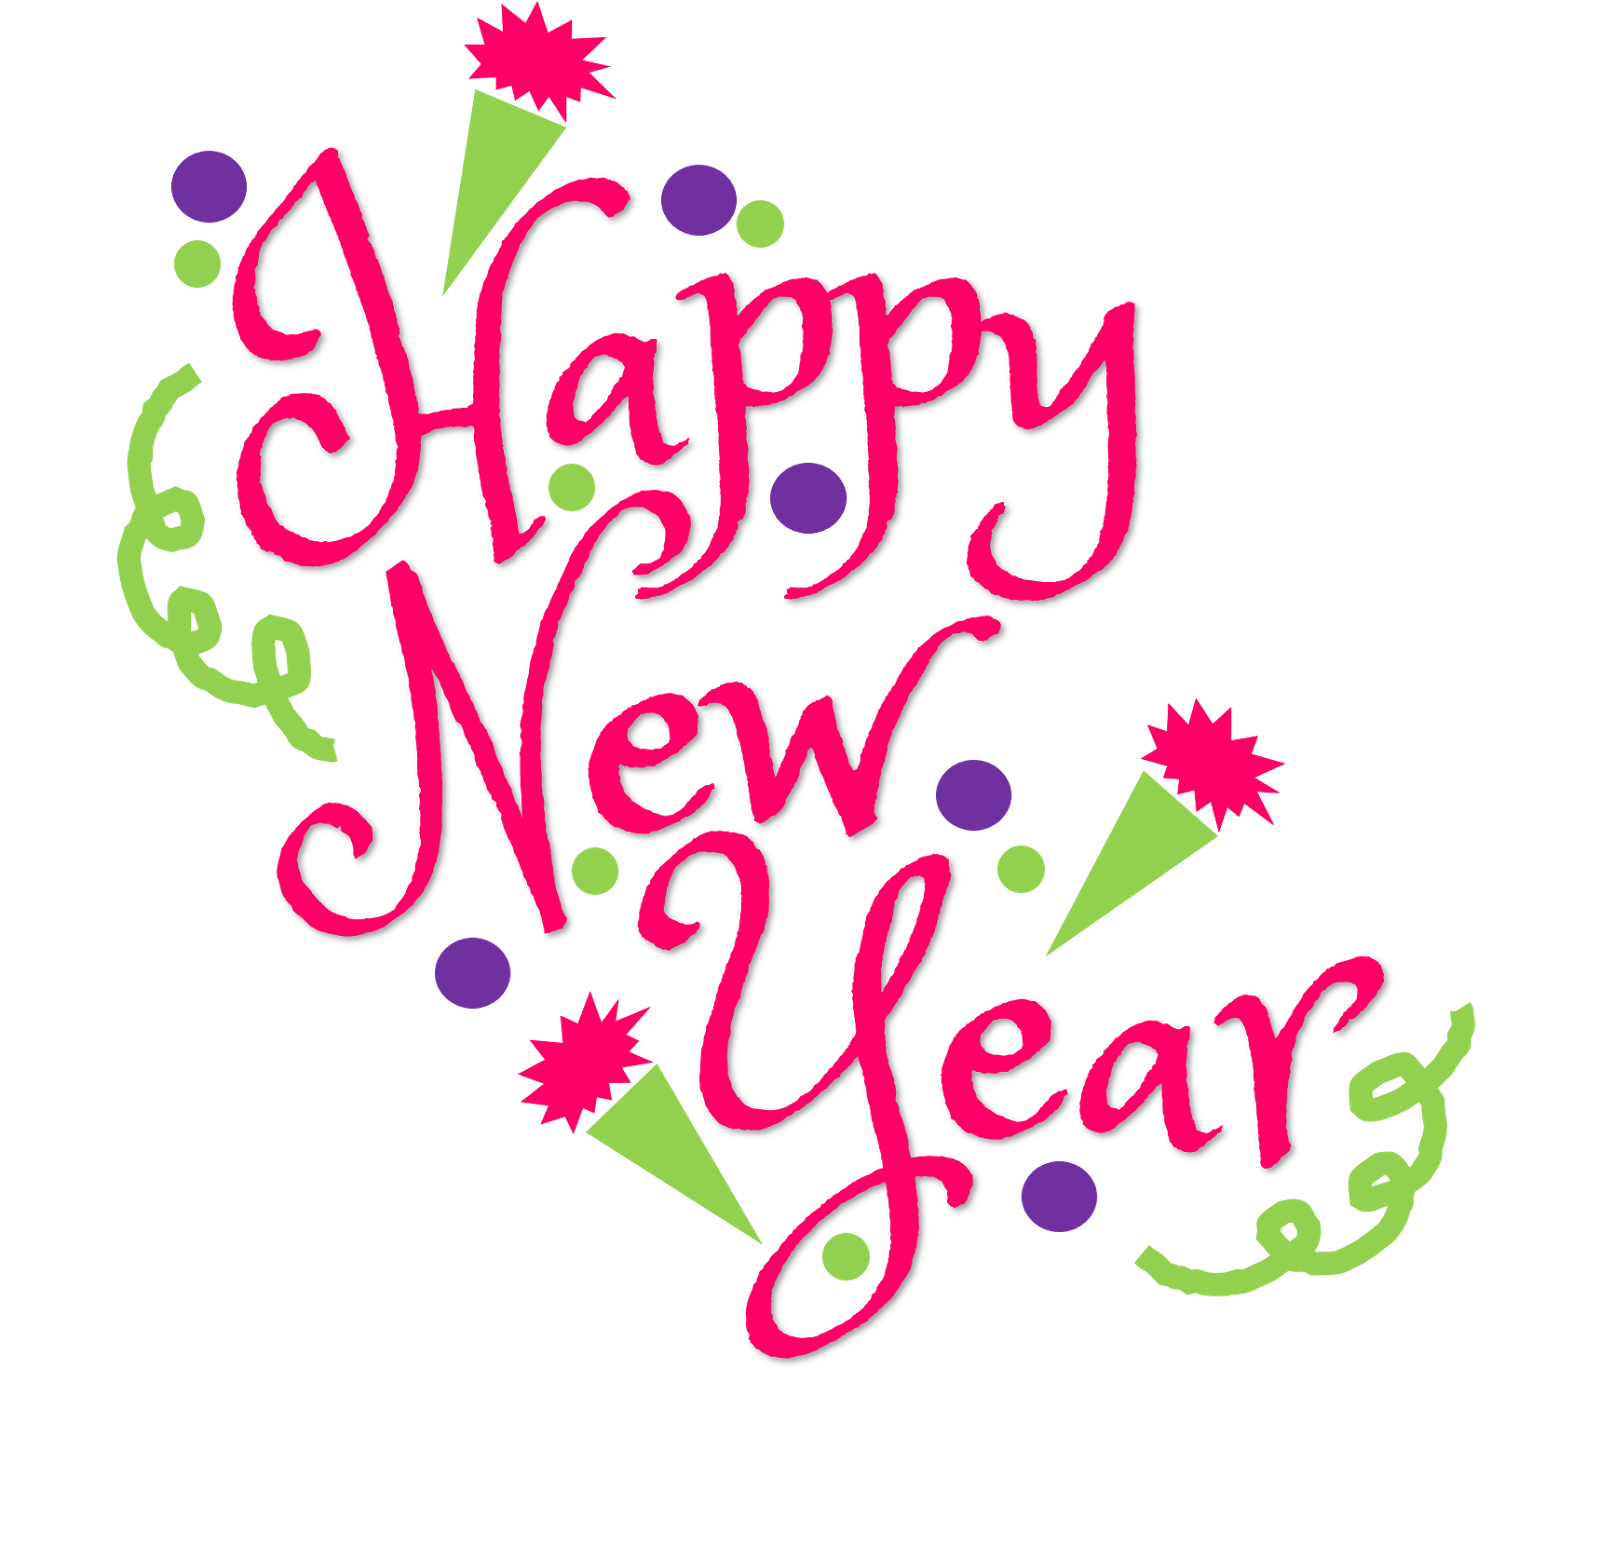 Happy new year images. Fitness clipart banner